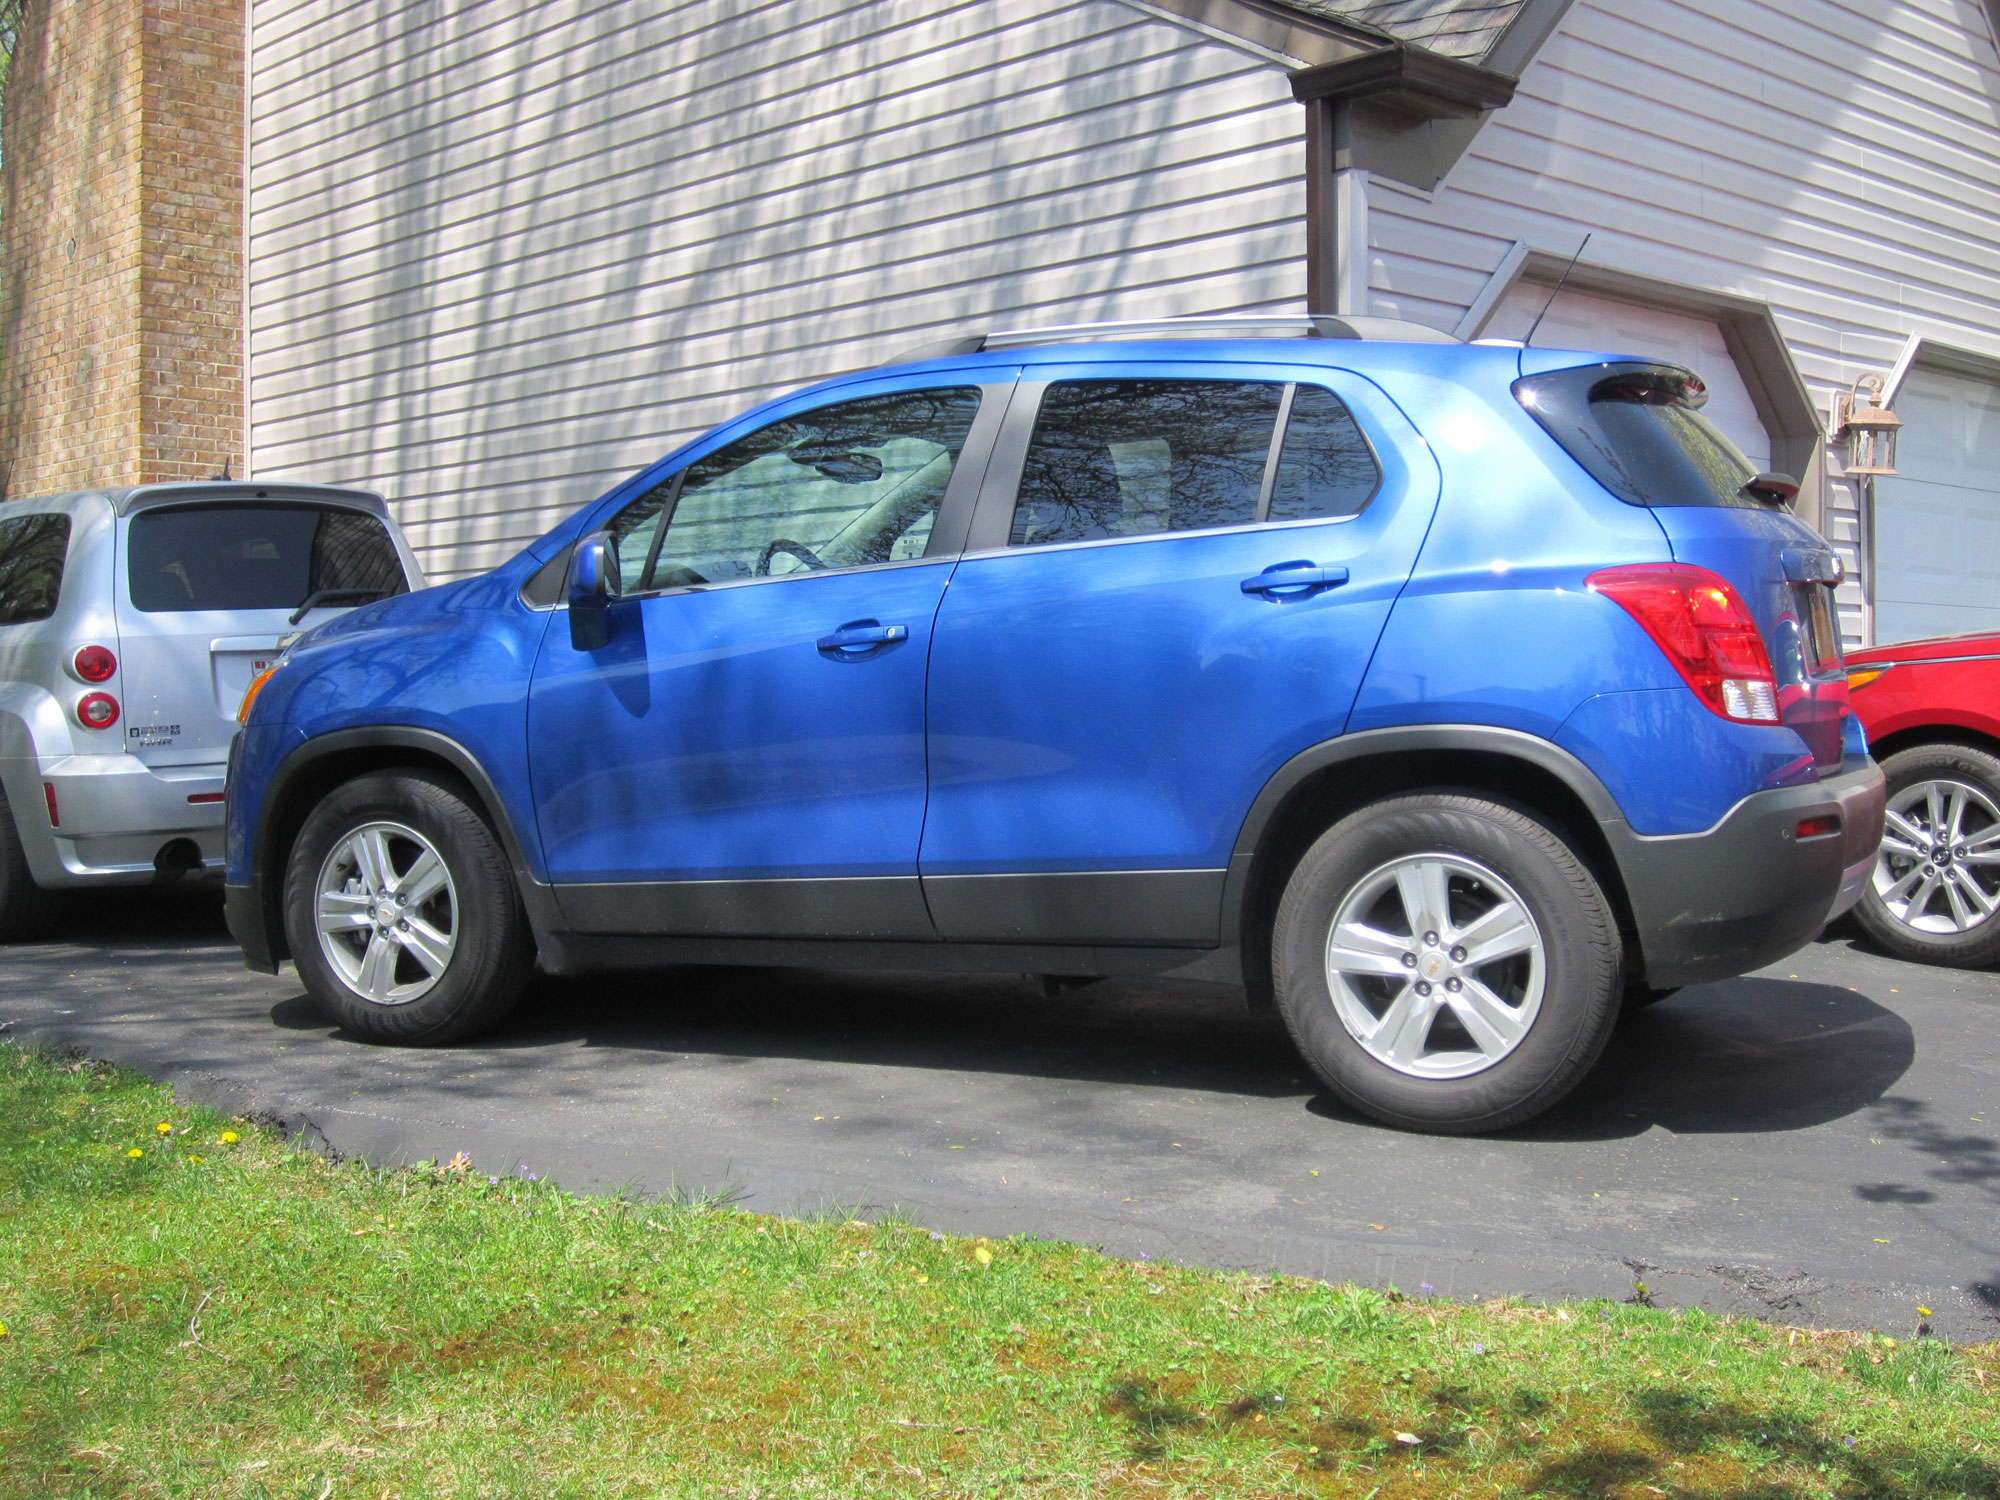 The next big thing in the car world: Smaller crossovers and the 2015 Chevrolet Trax